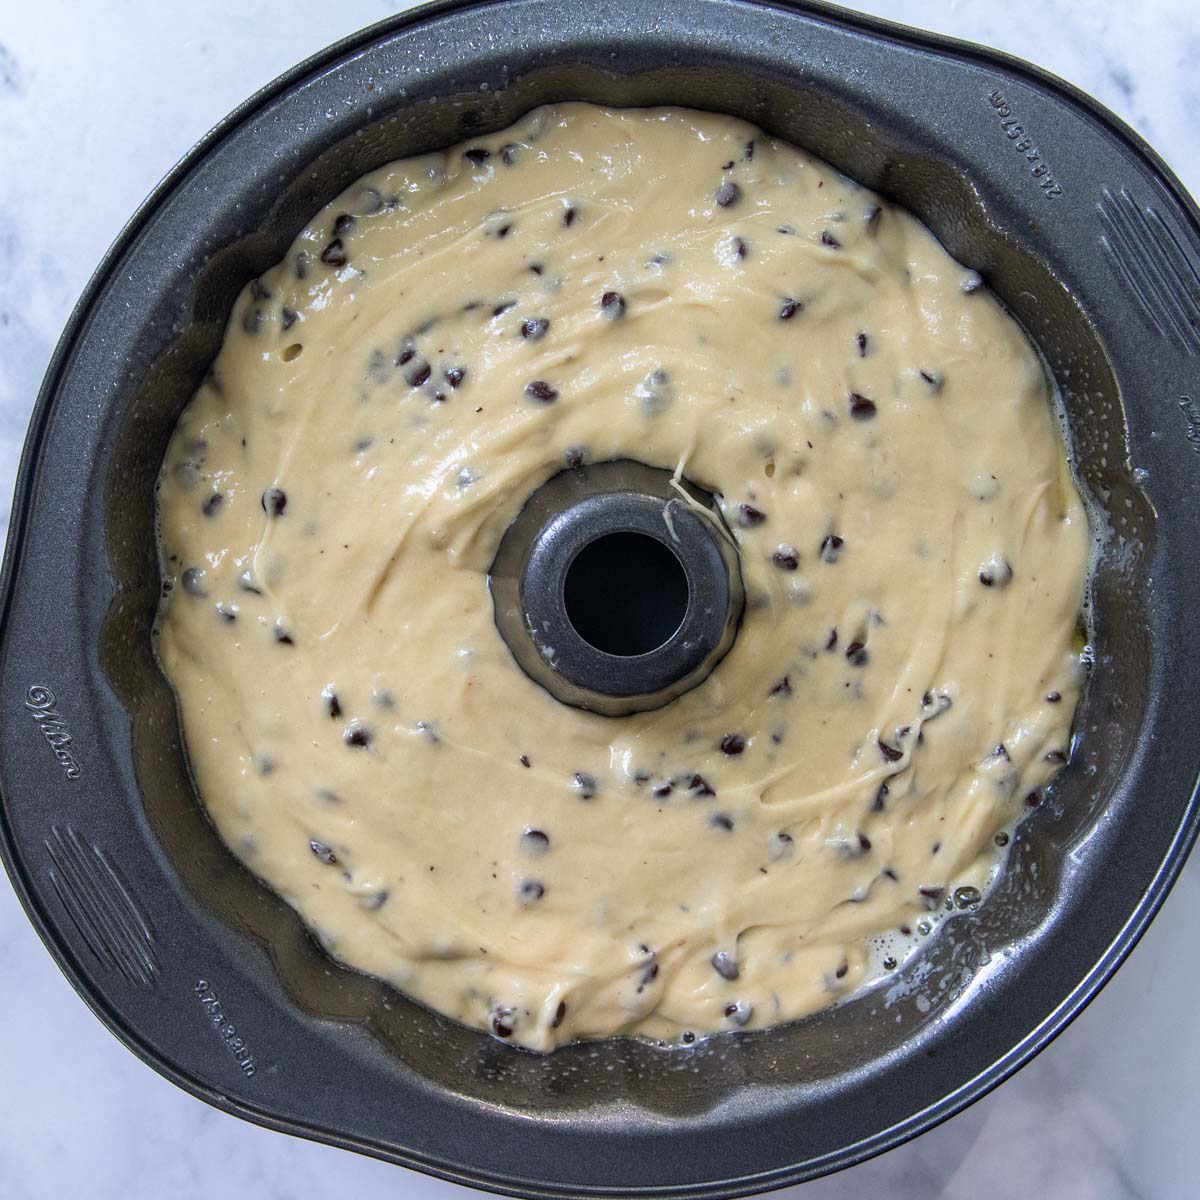 an unbaked chocolate chip cake in a bundt pan.